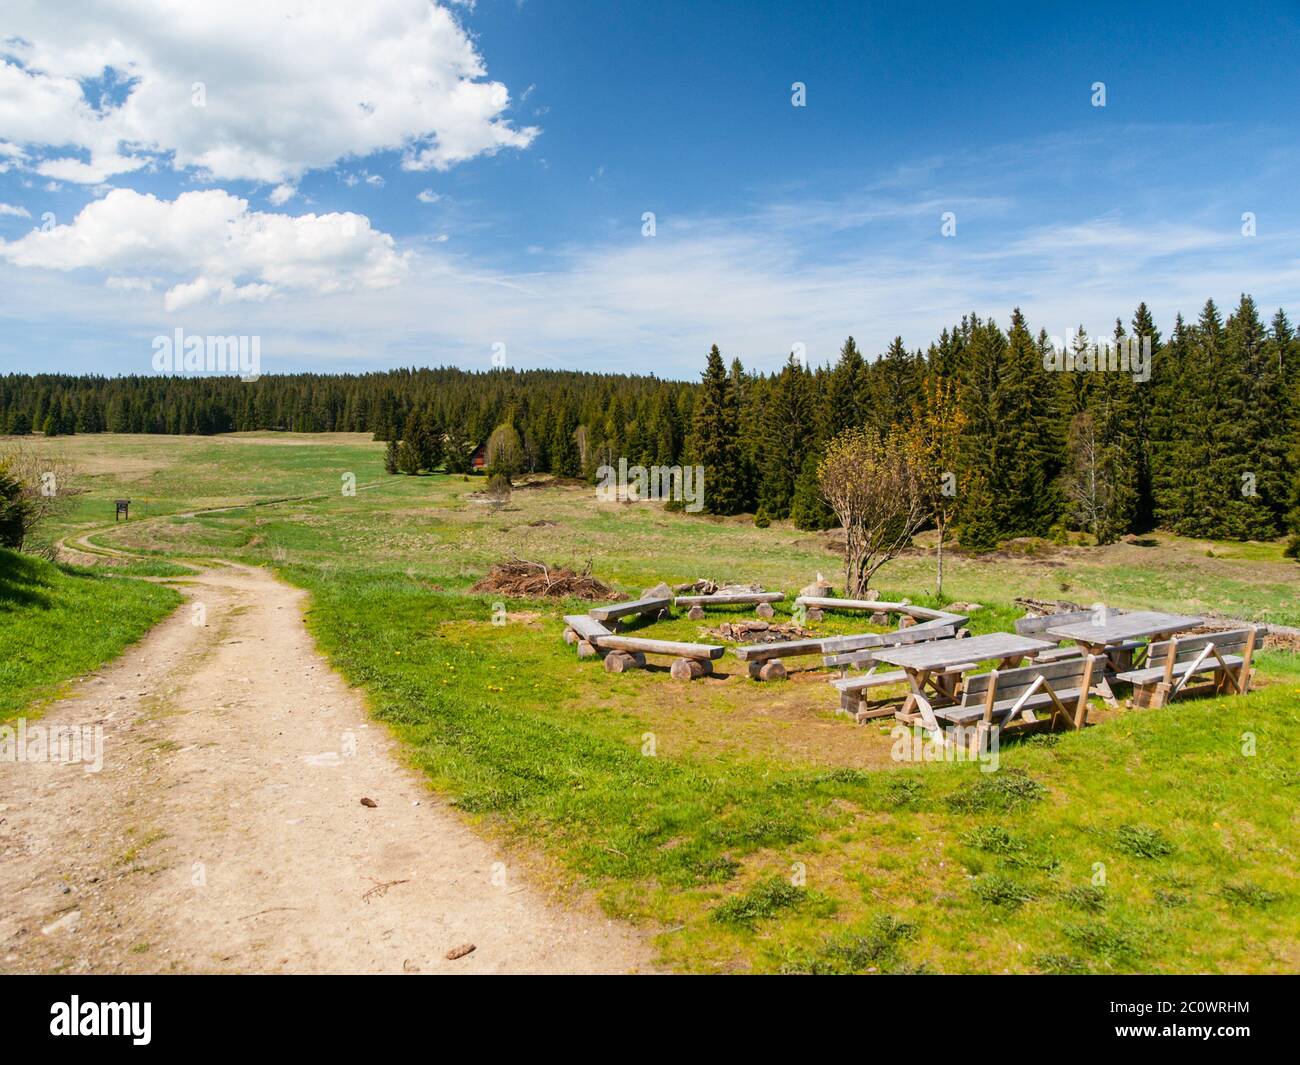 Campfire ring with benches and tables in rural countryside Stock Photo